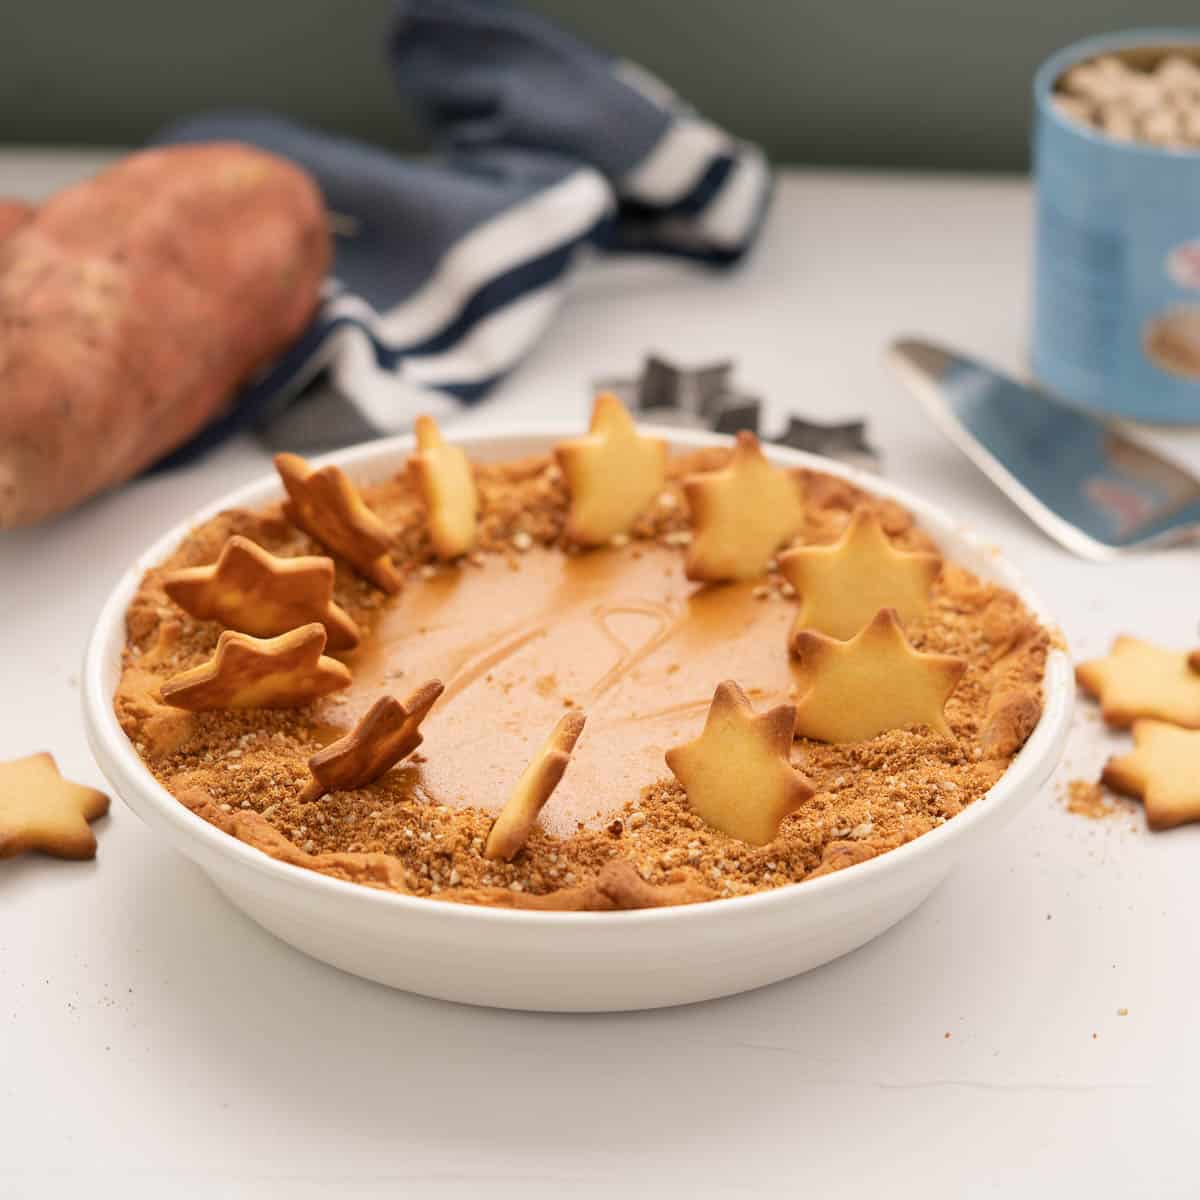 Sweet potato pie decorated with gingernut crumb and pastry star.